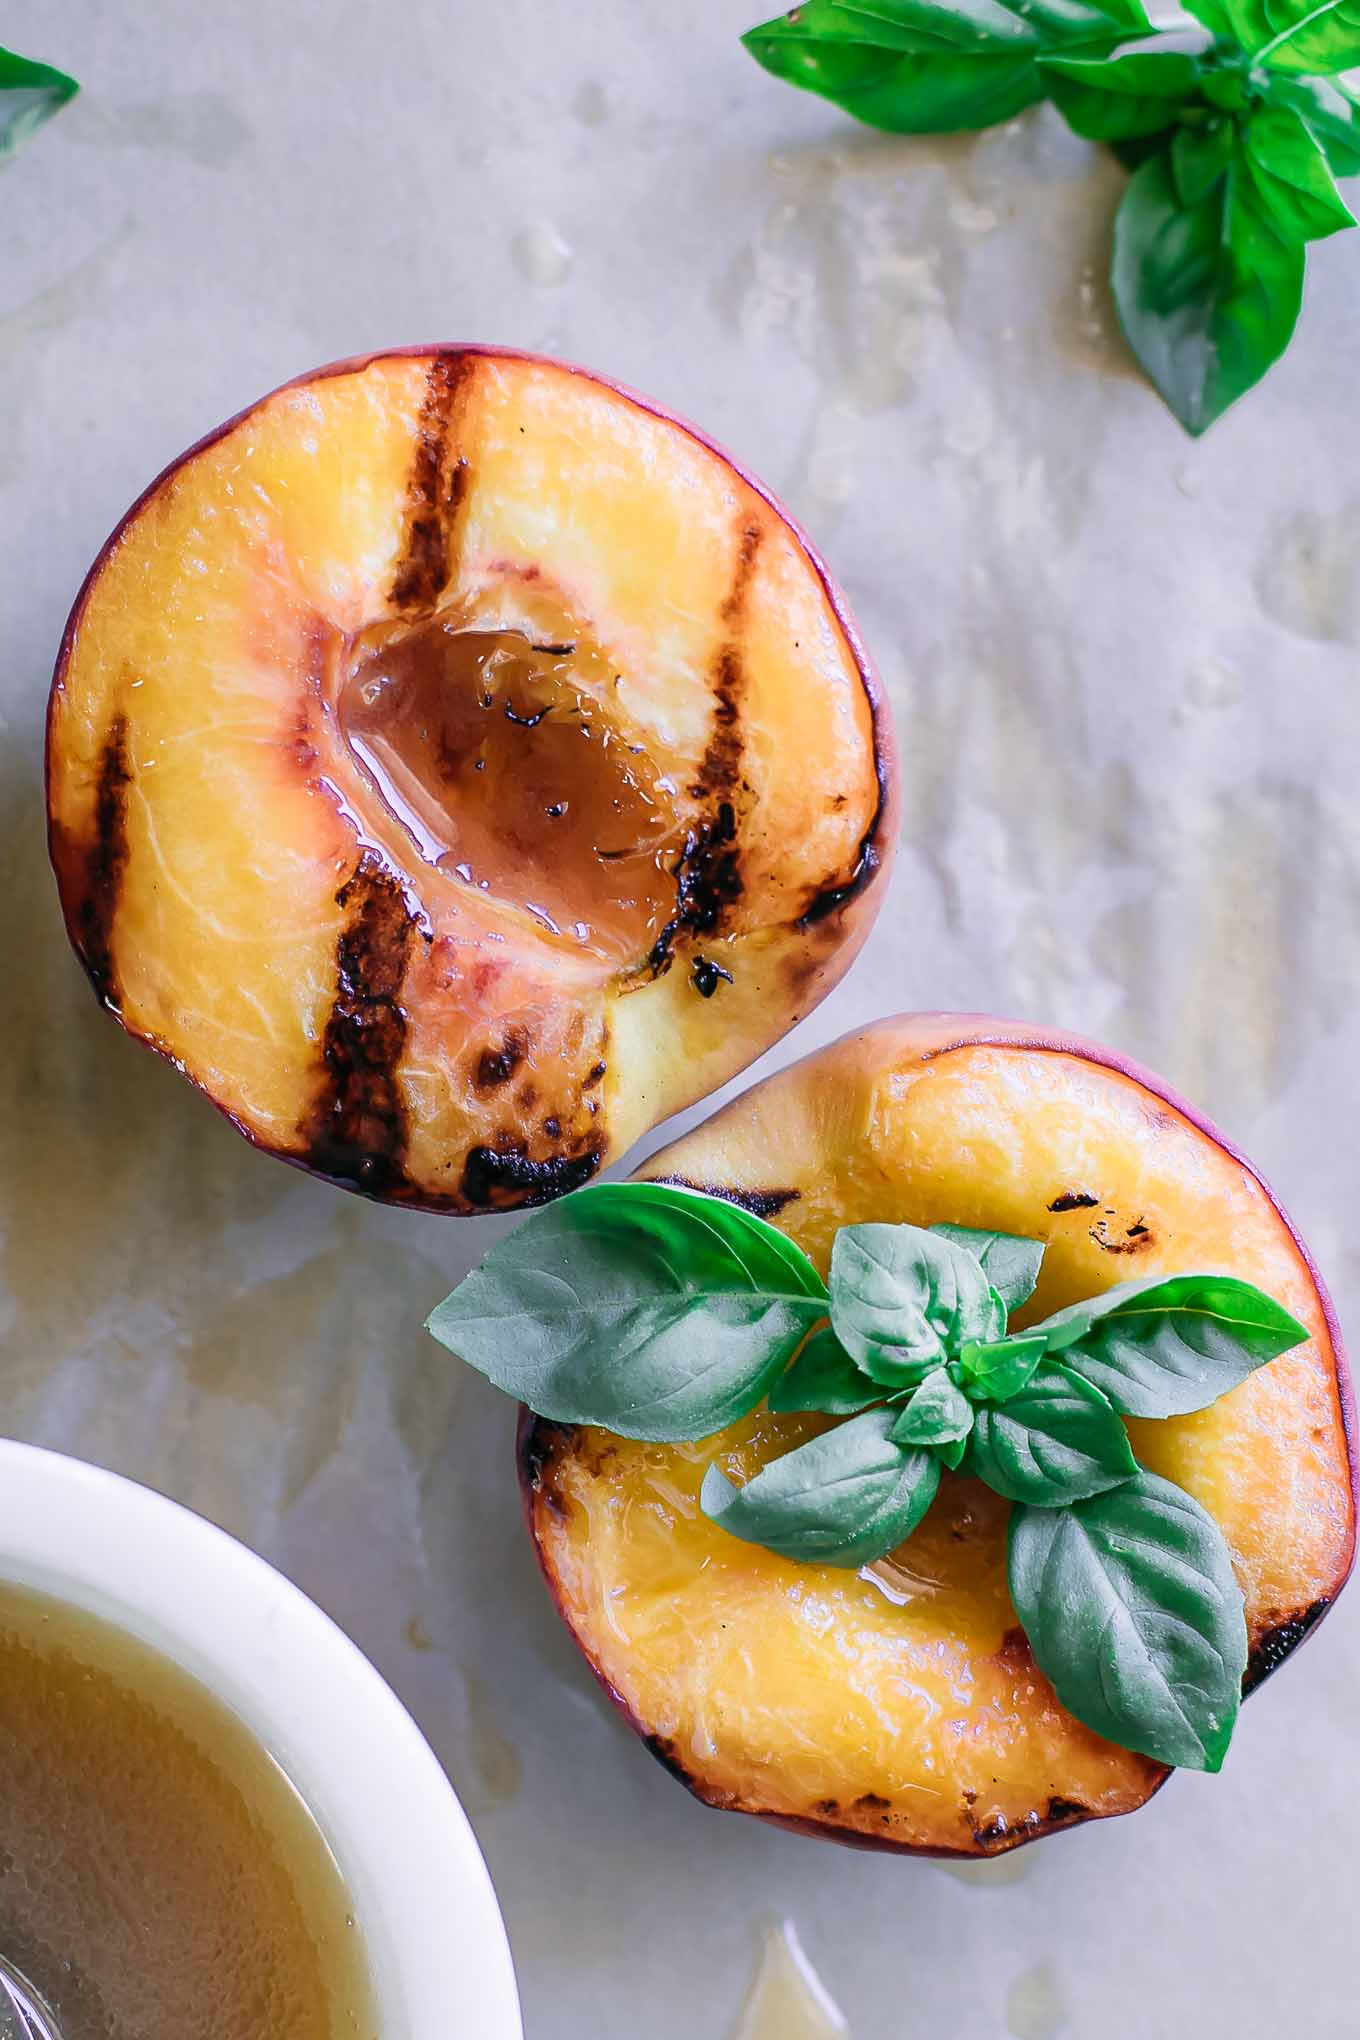 grilled peaches on a wood table with brown sugar bourbon sauce